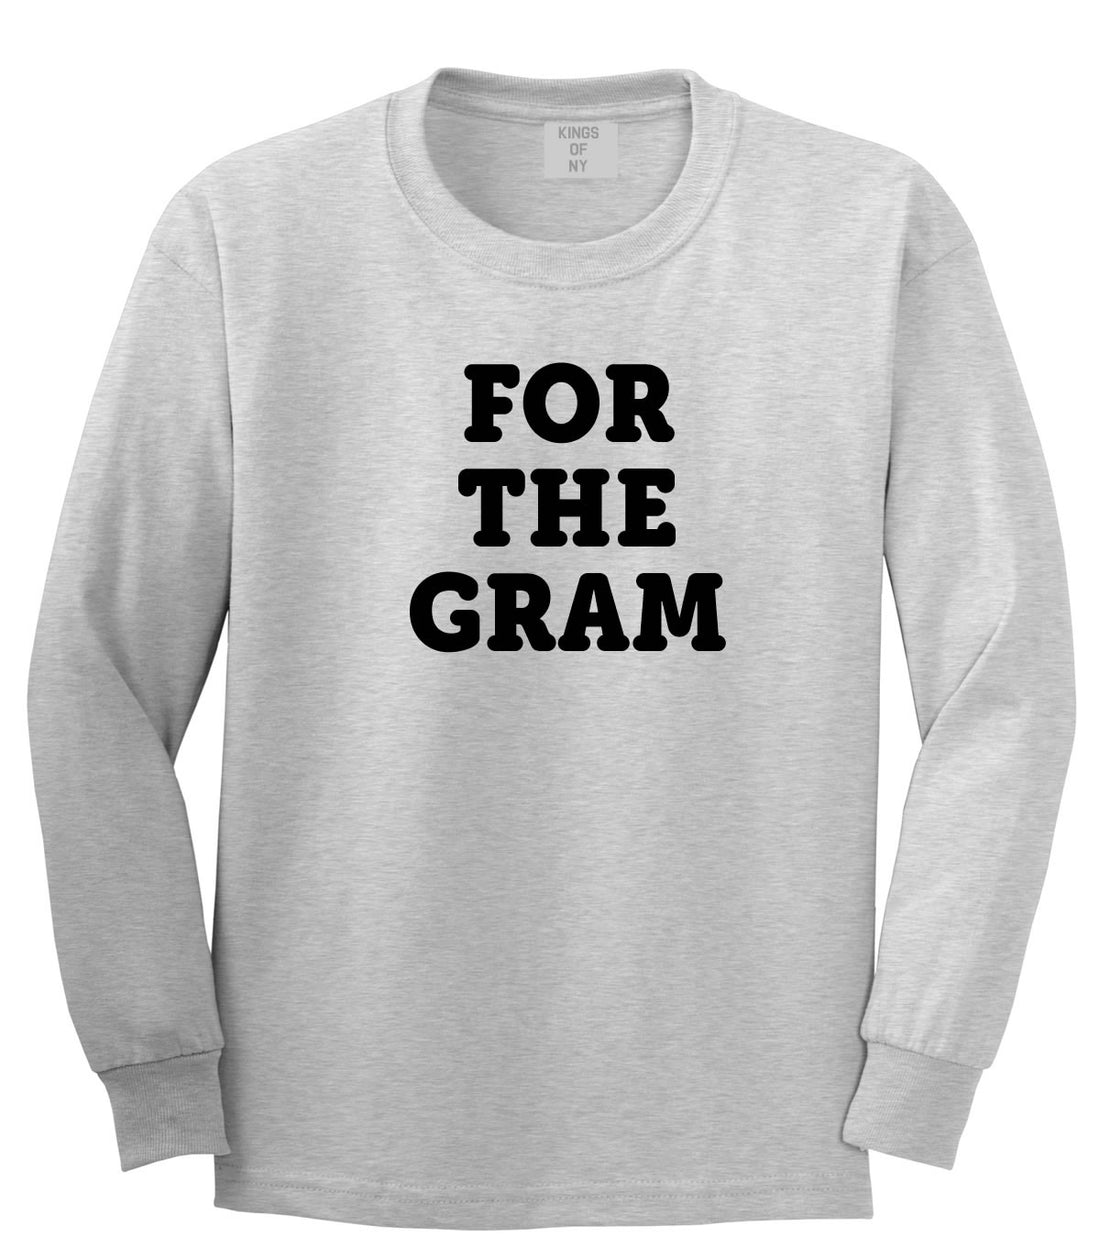 Do It For The Gram Long Sleeve T-Shirt by Kings Of NY